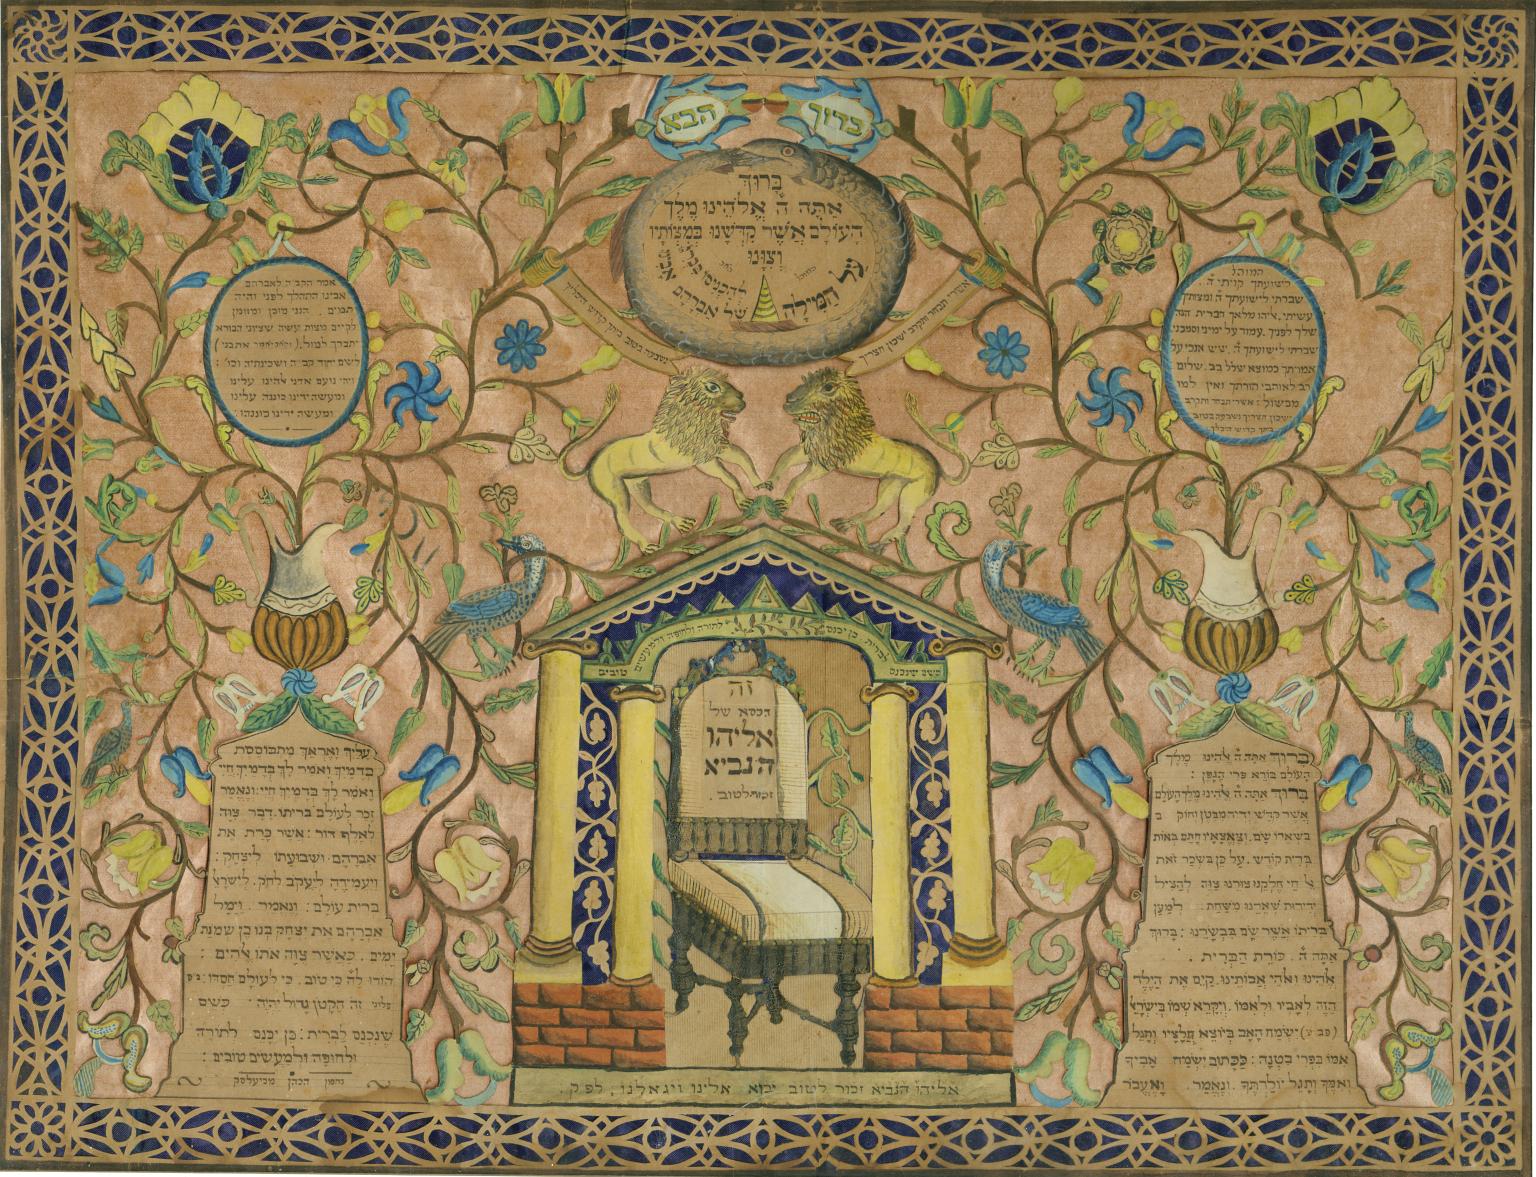 Papercut featuring a chair in the center with lions above, decorated with floral motifs and Hebrew text. 